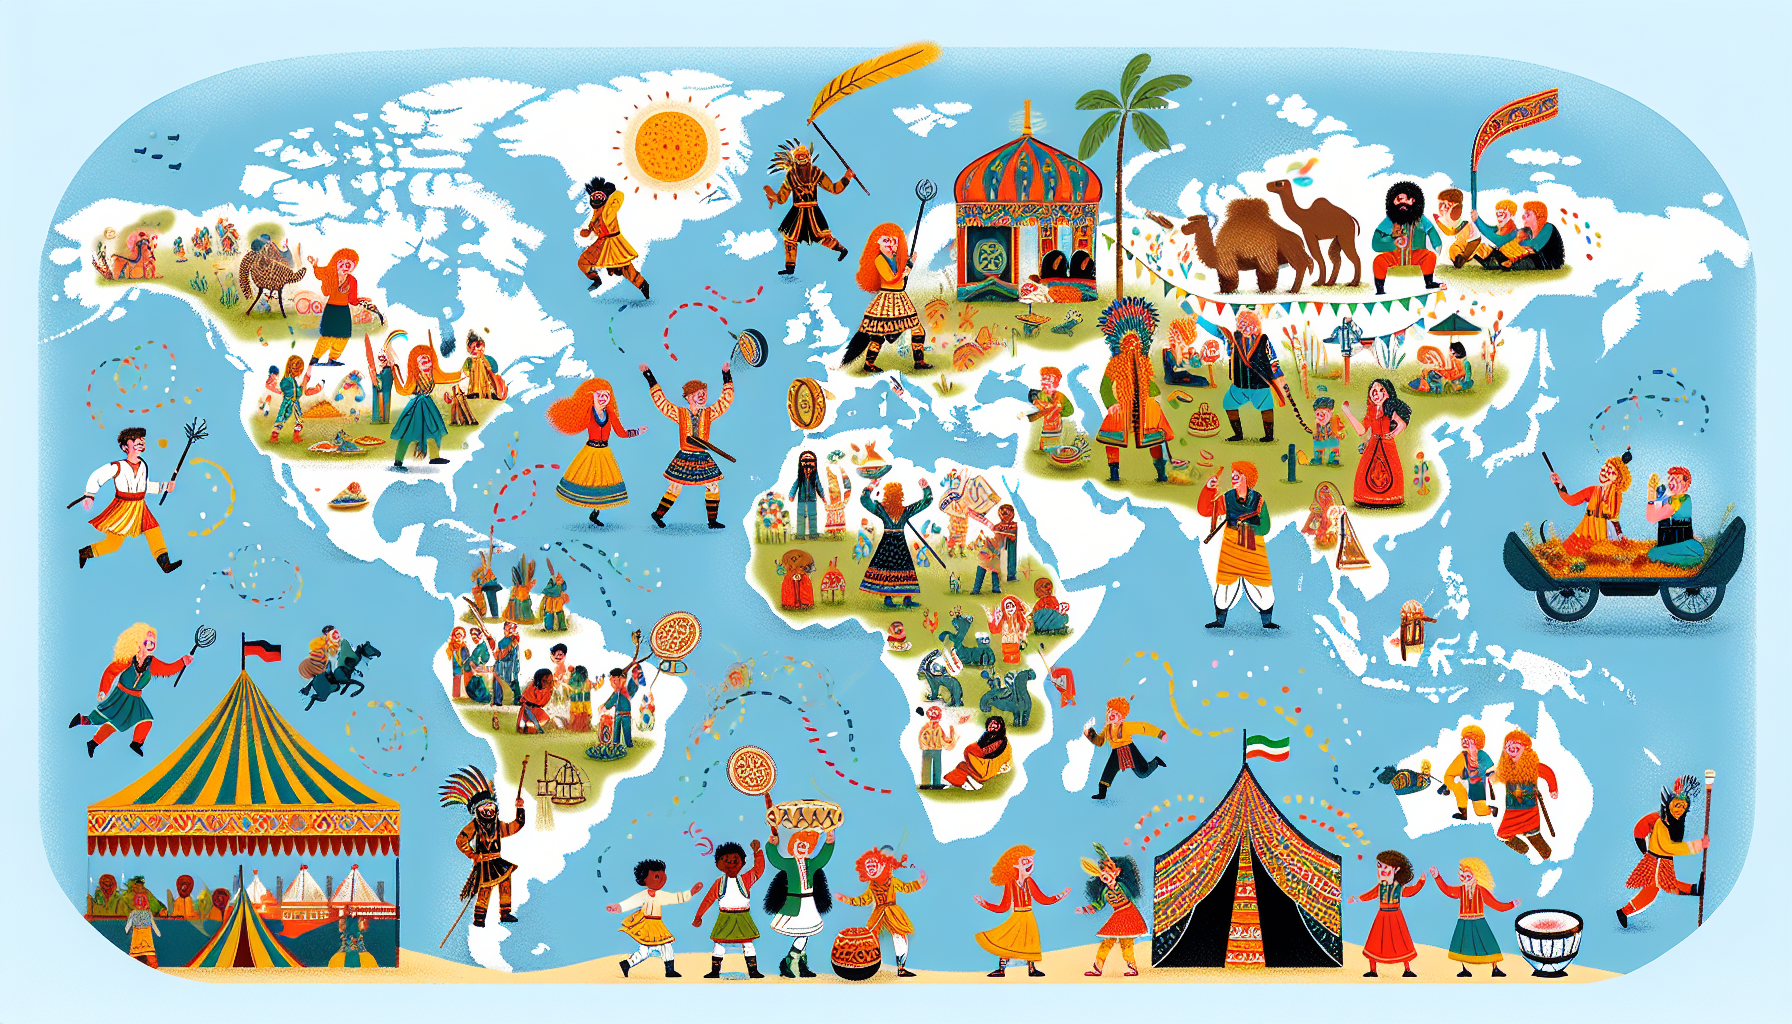 discover the most exhilarating festivals and events from around the world in this captivating collection.